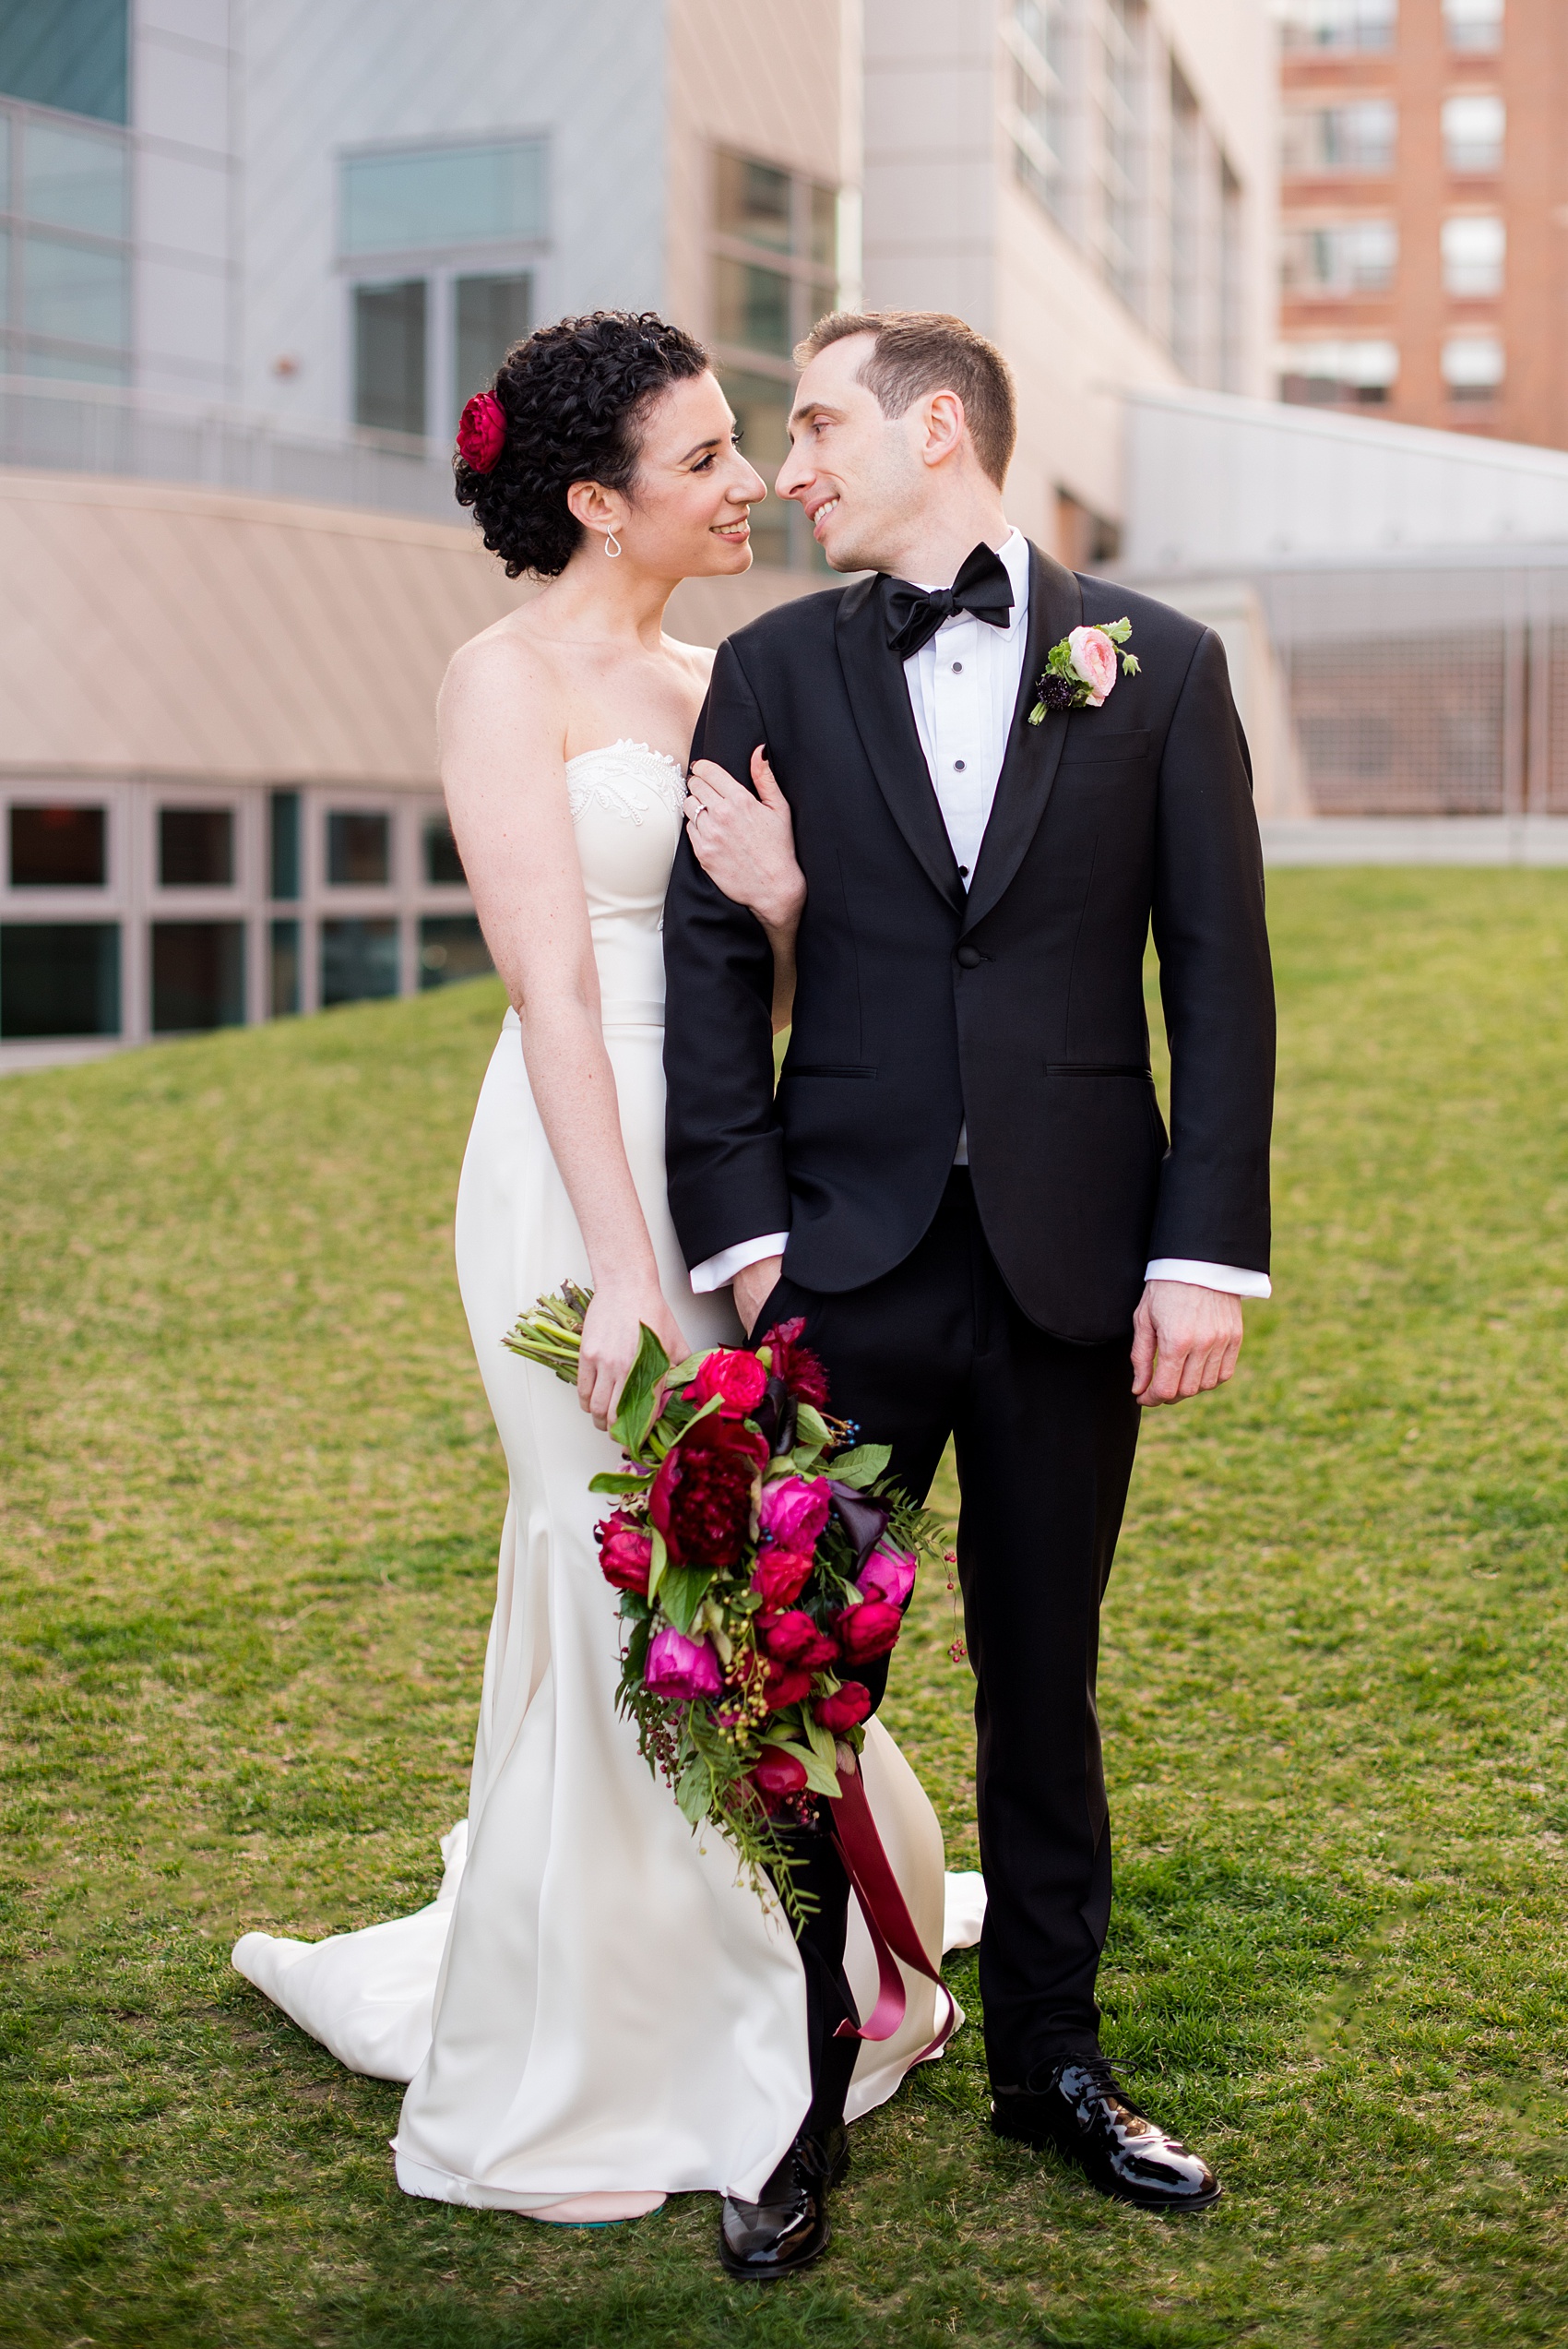 W Hoboken Wedding Photos by Mikkel Paige Photography. Spring wedding overlooking the NYC skyline, with a sexy black, deep red, burgundy and fuchsia color palette. Picture of the bride and groom during golden hour. #HobokenWedding #mikkelpaige #springwedding #romanticwedding #NewJerseyWeddingPhotos